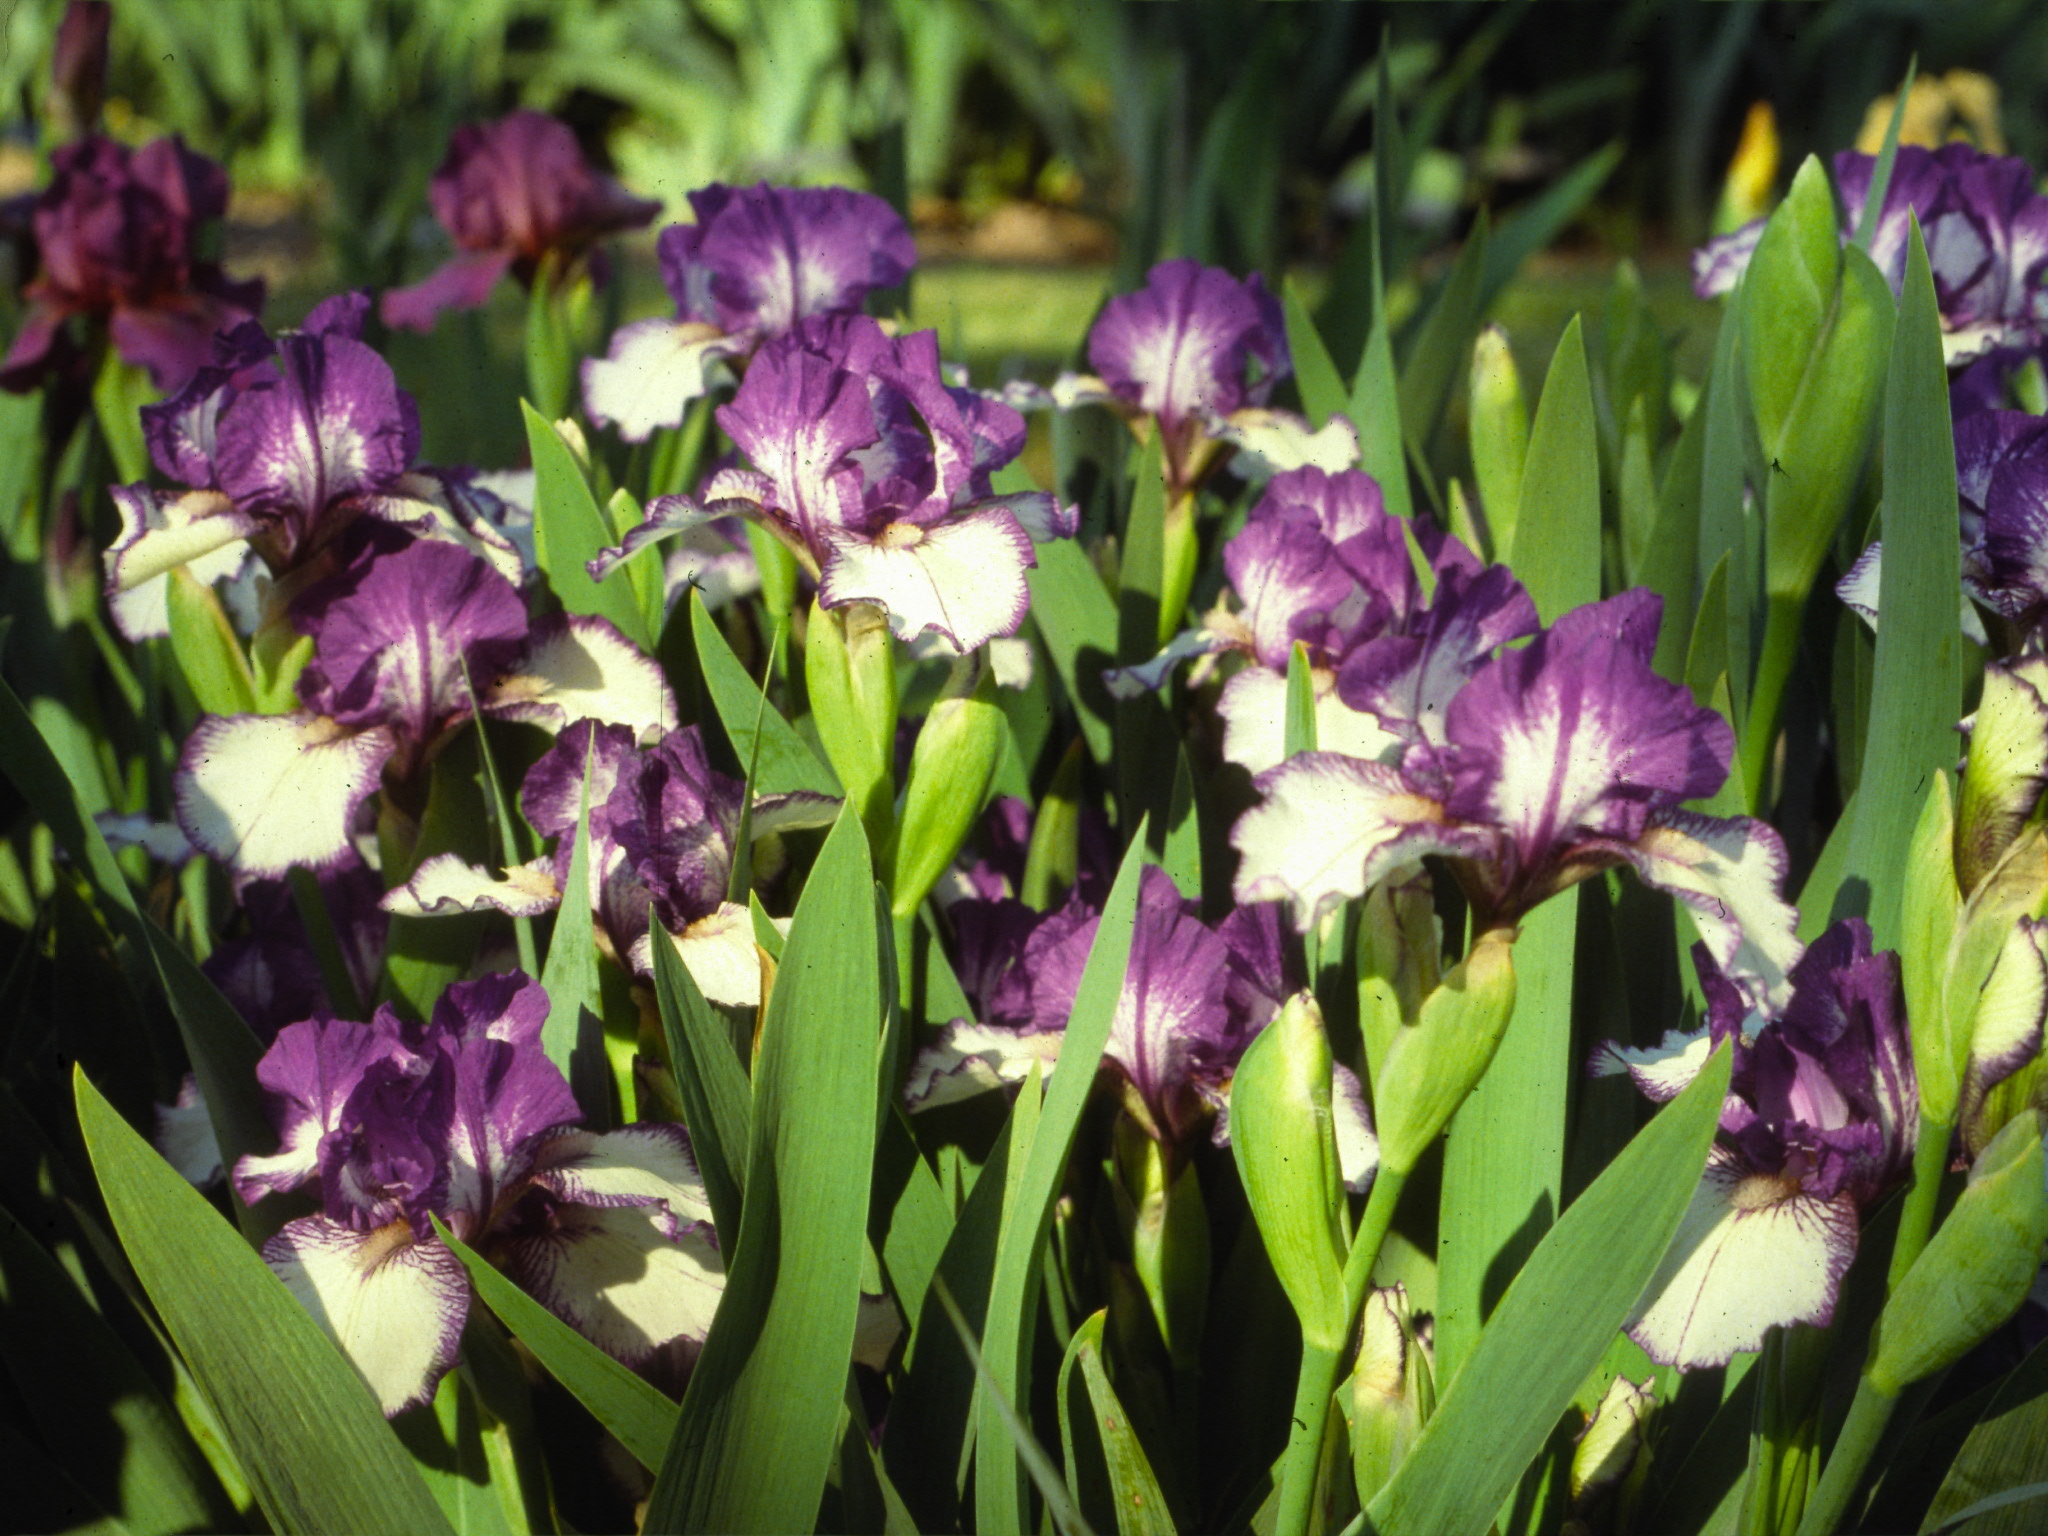 Greater St. Louis Iris Society - The Classifications of Bearded Irises